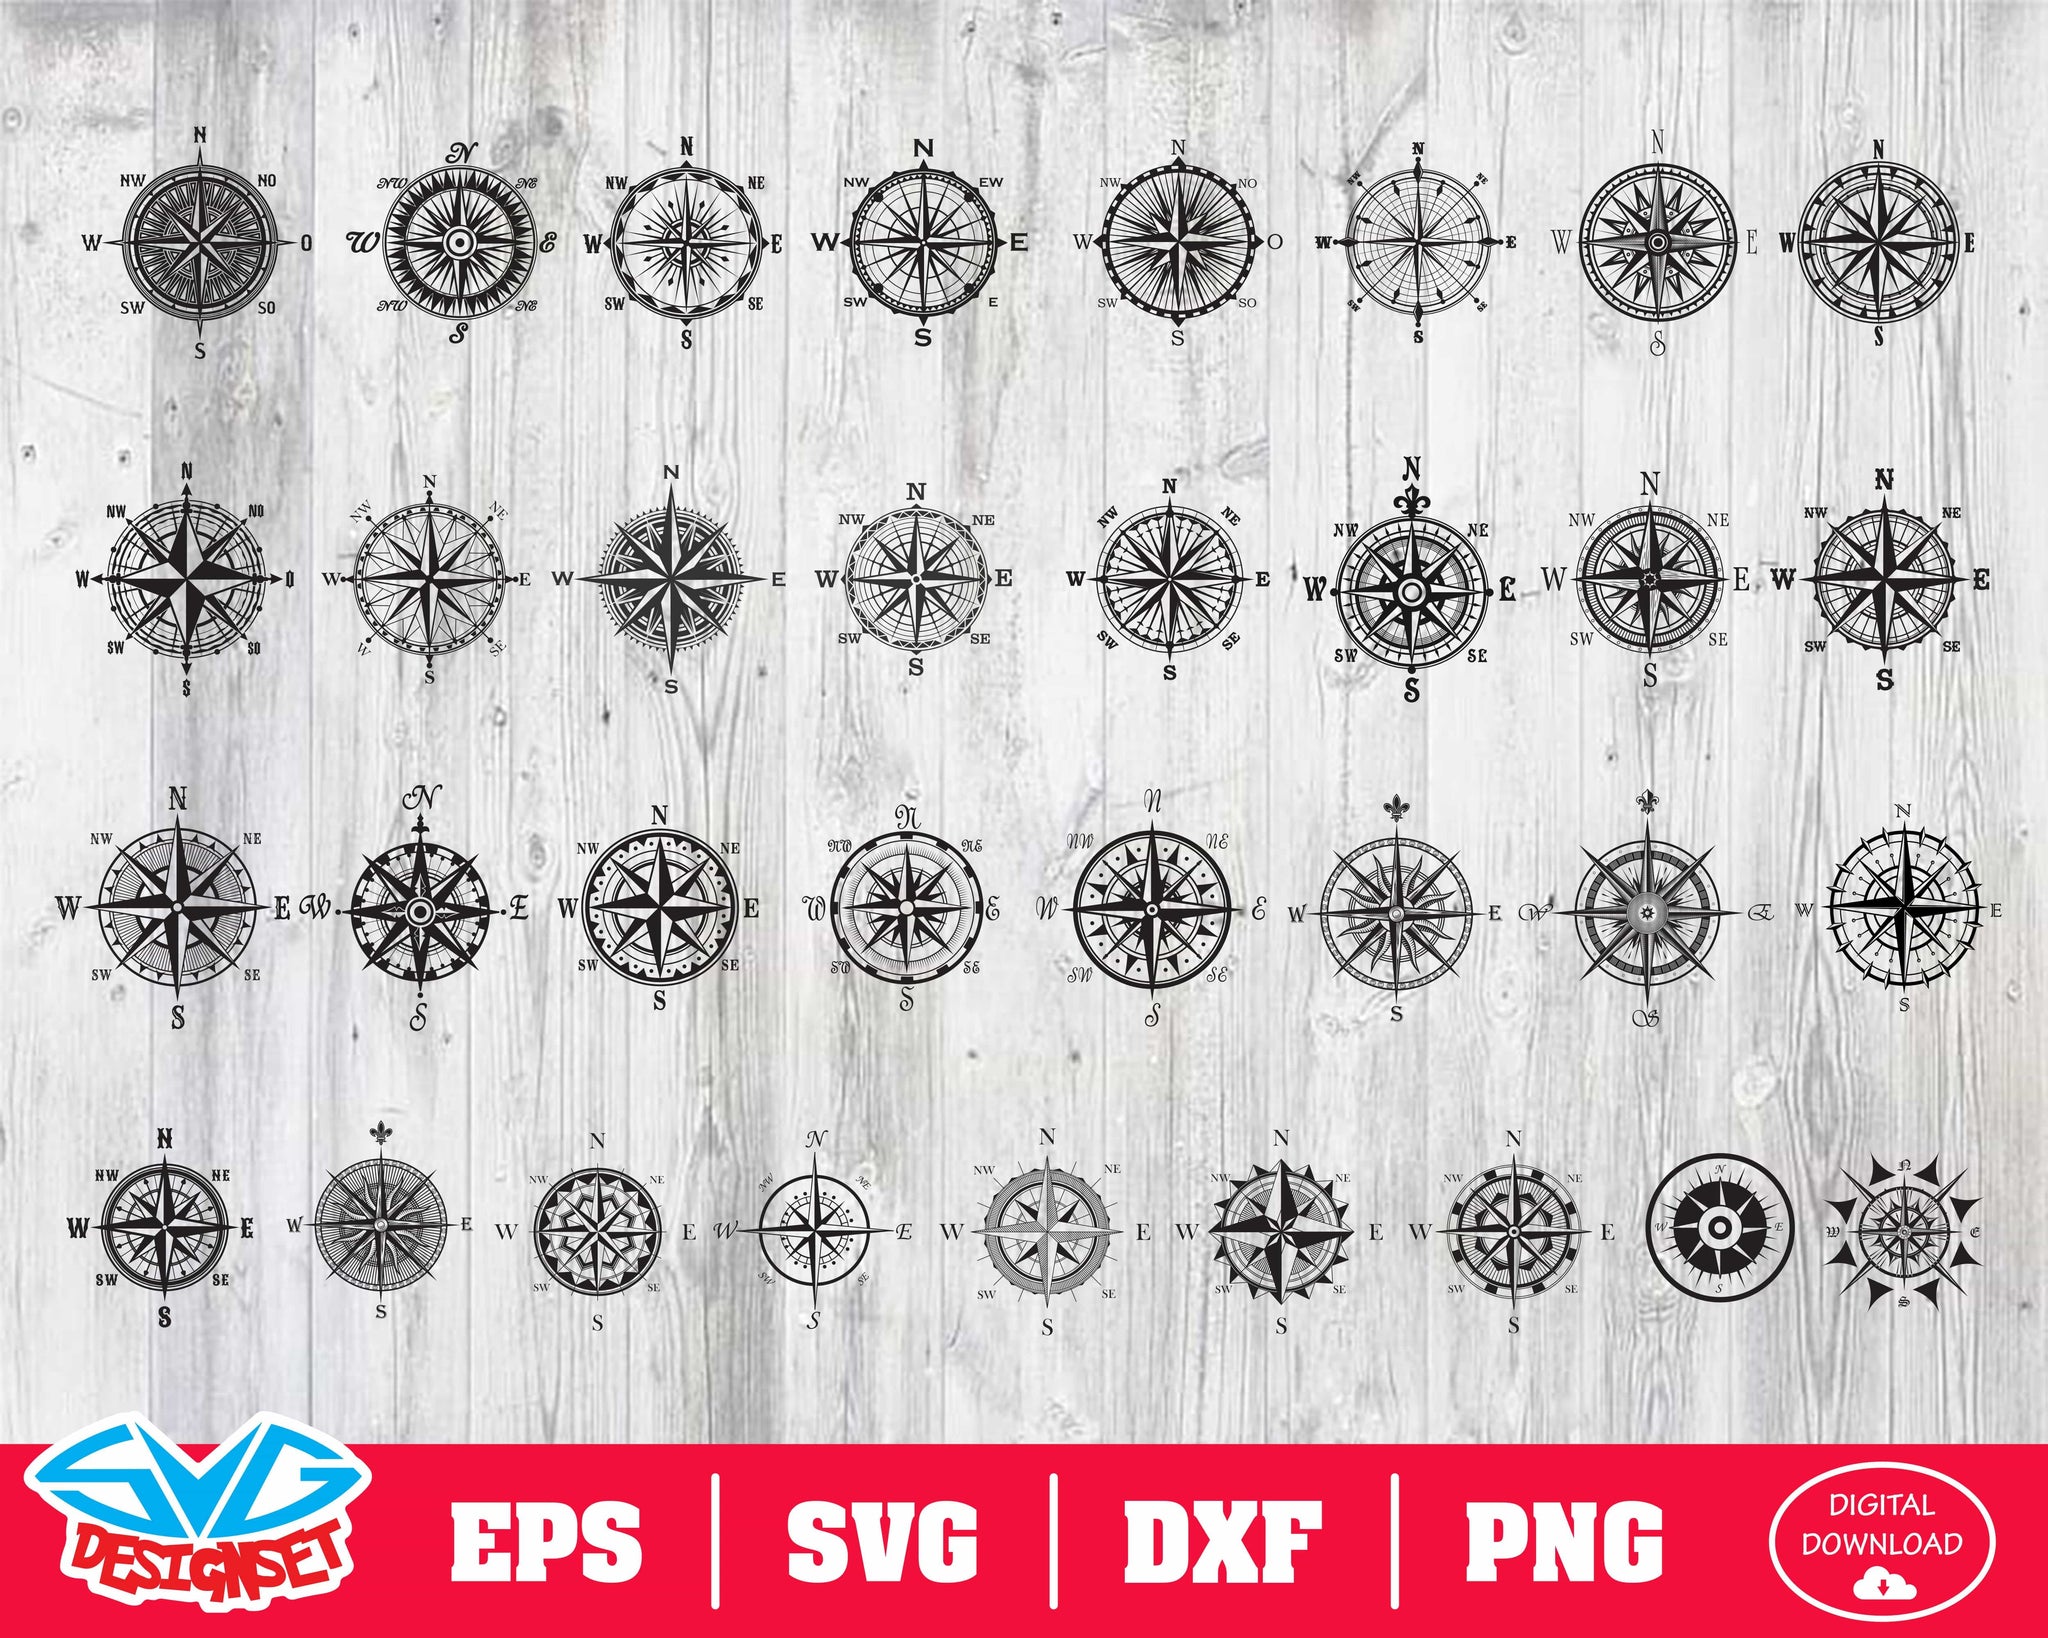 Compass Svg, Dxf, Eps, Png, Clipart, Silhouette and Cutfiles - SVGDesignSets